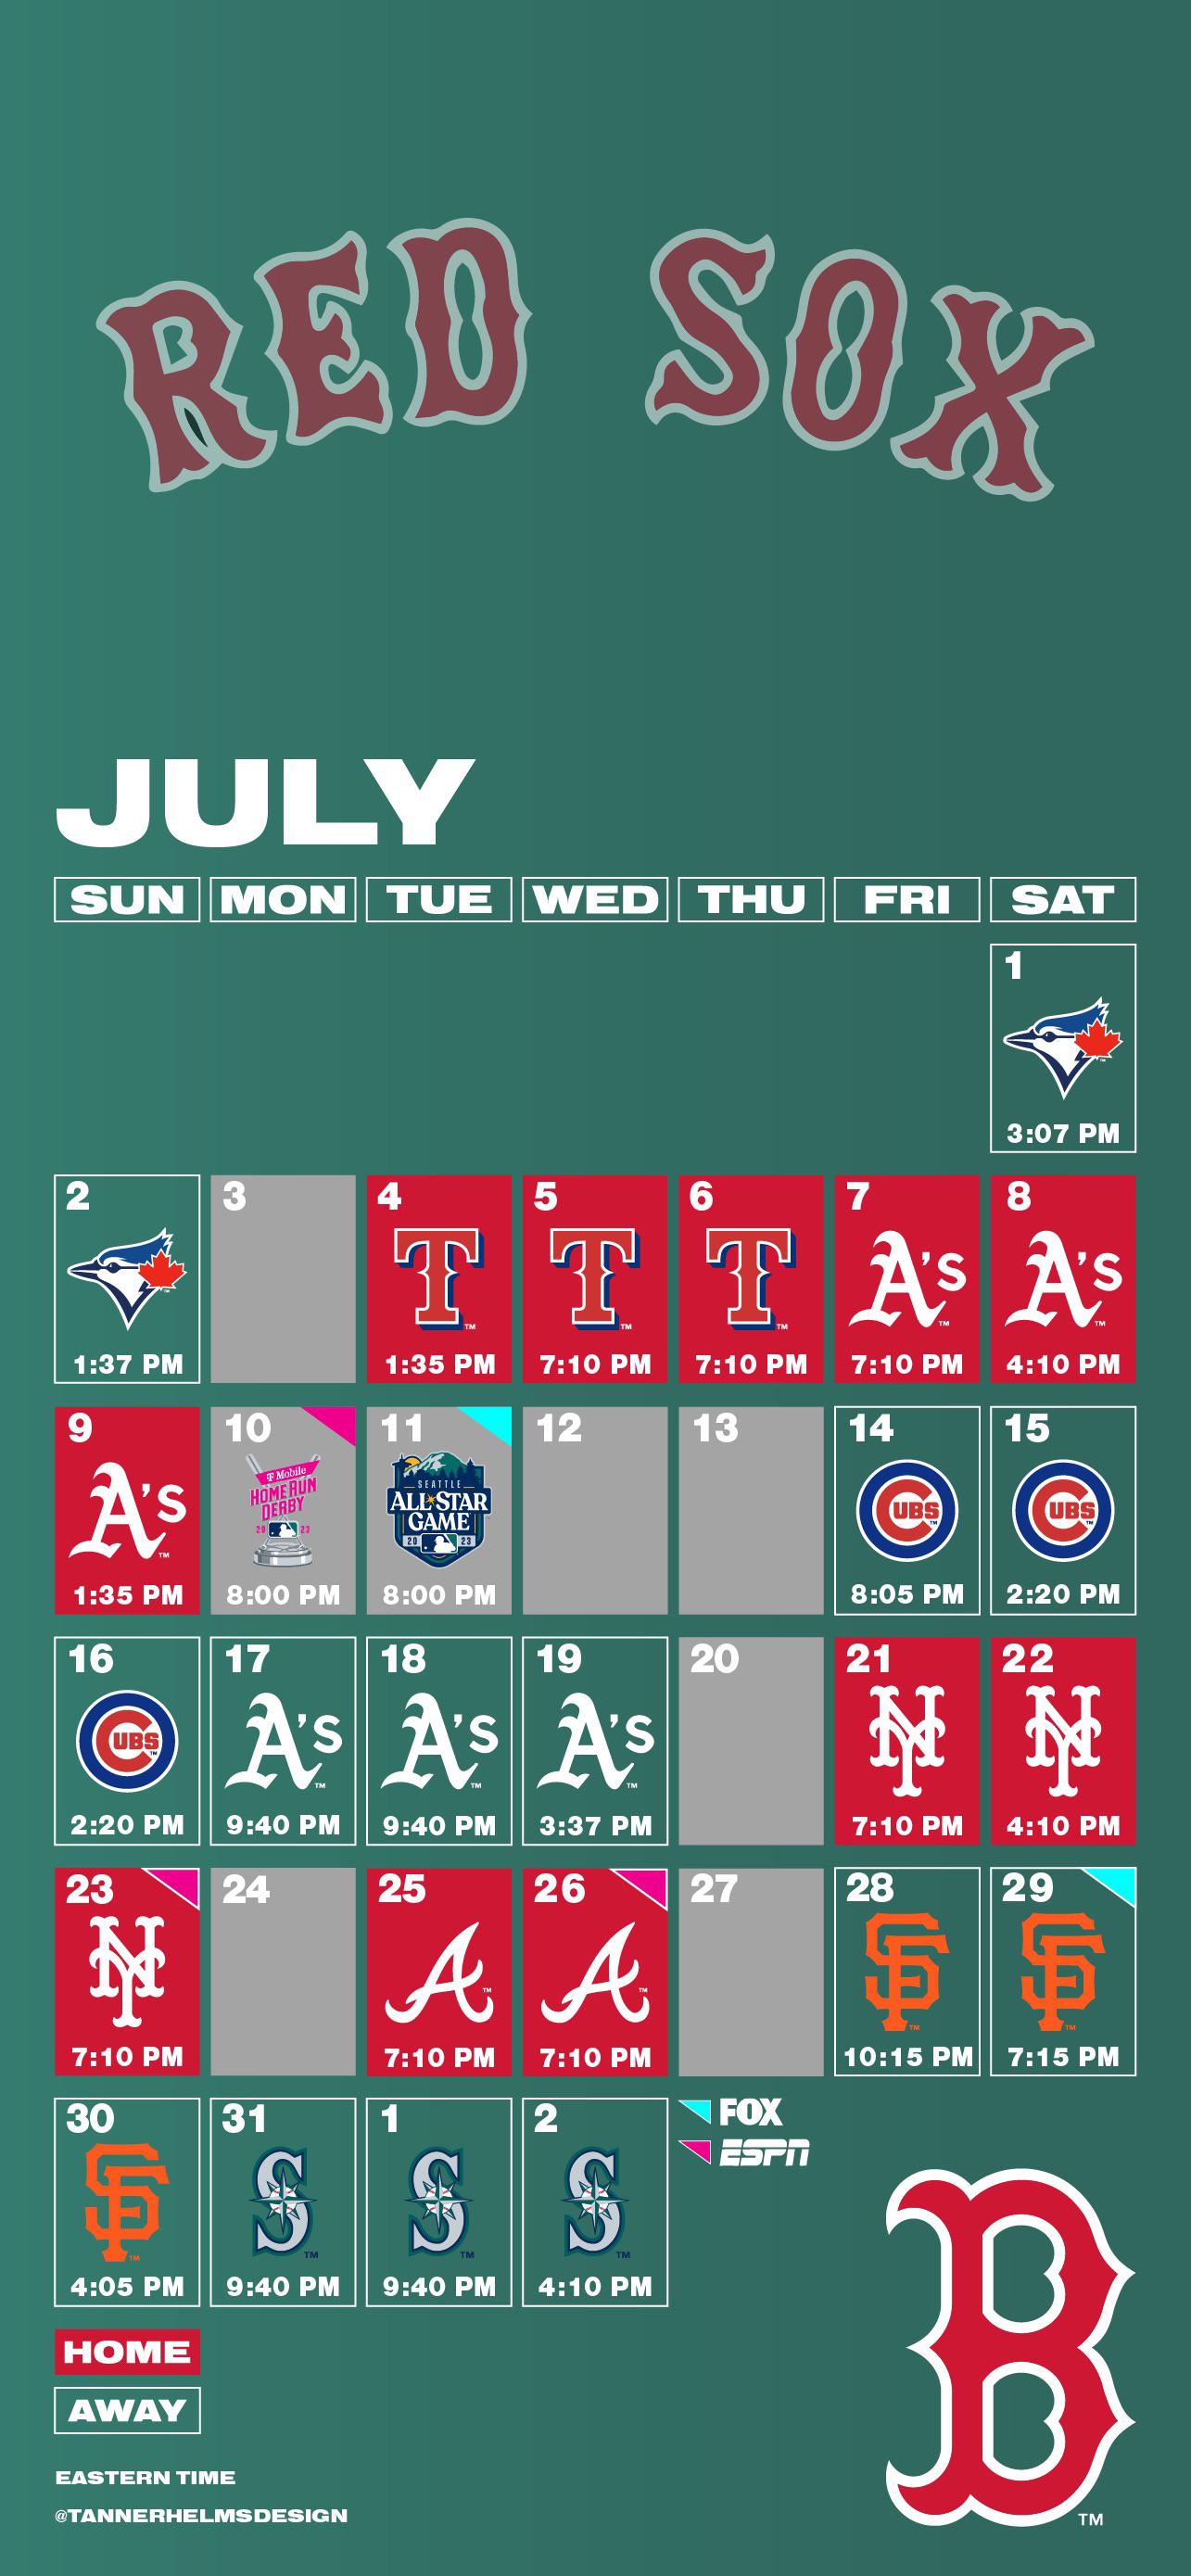 Someone Requested A Green Monster Themed Version Of The Schedule